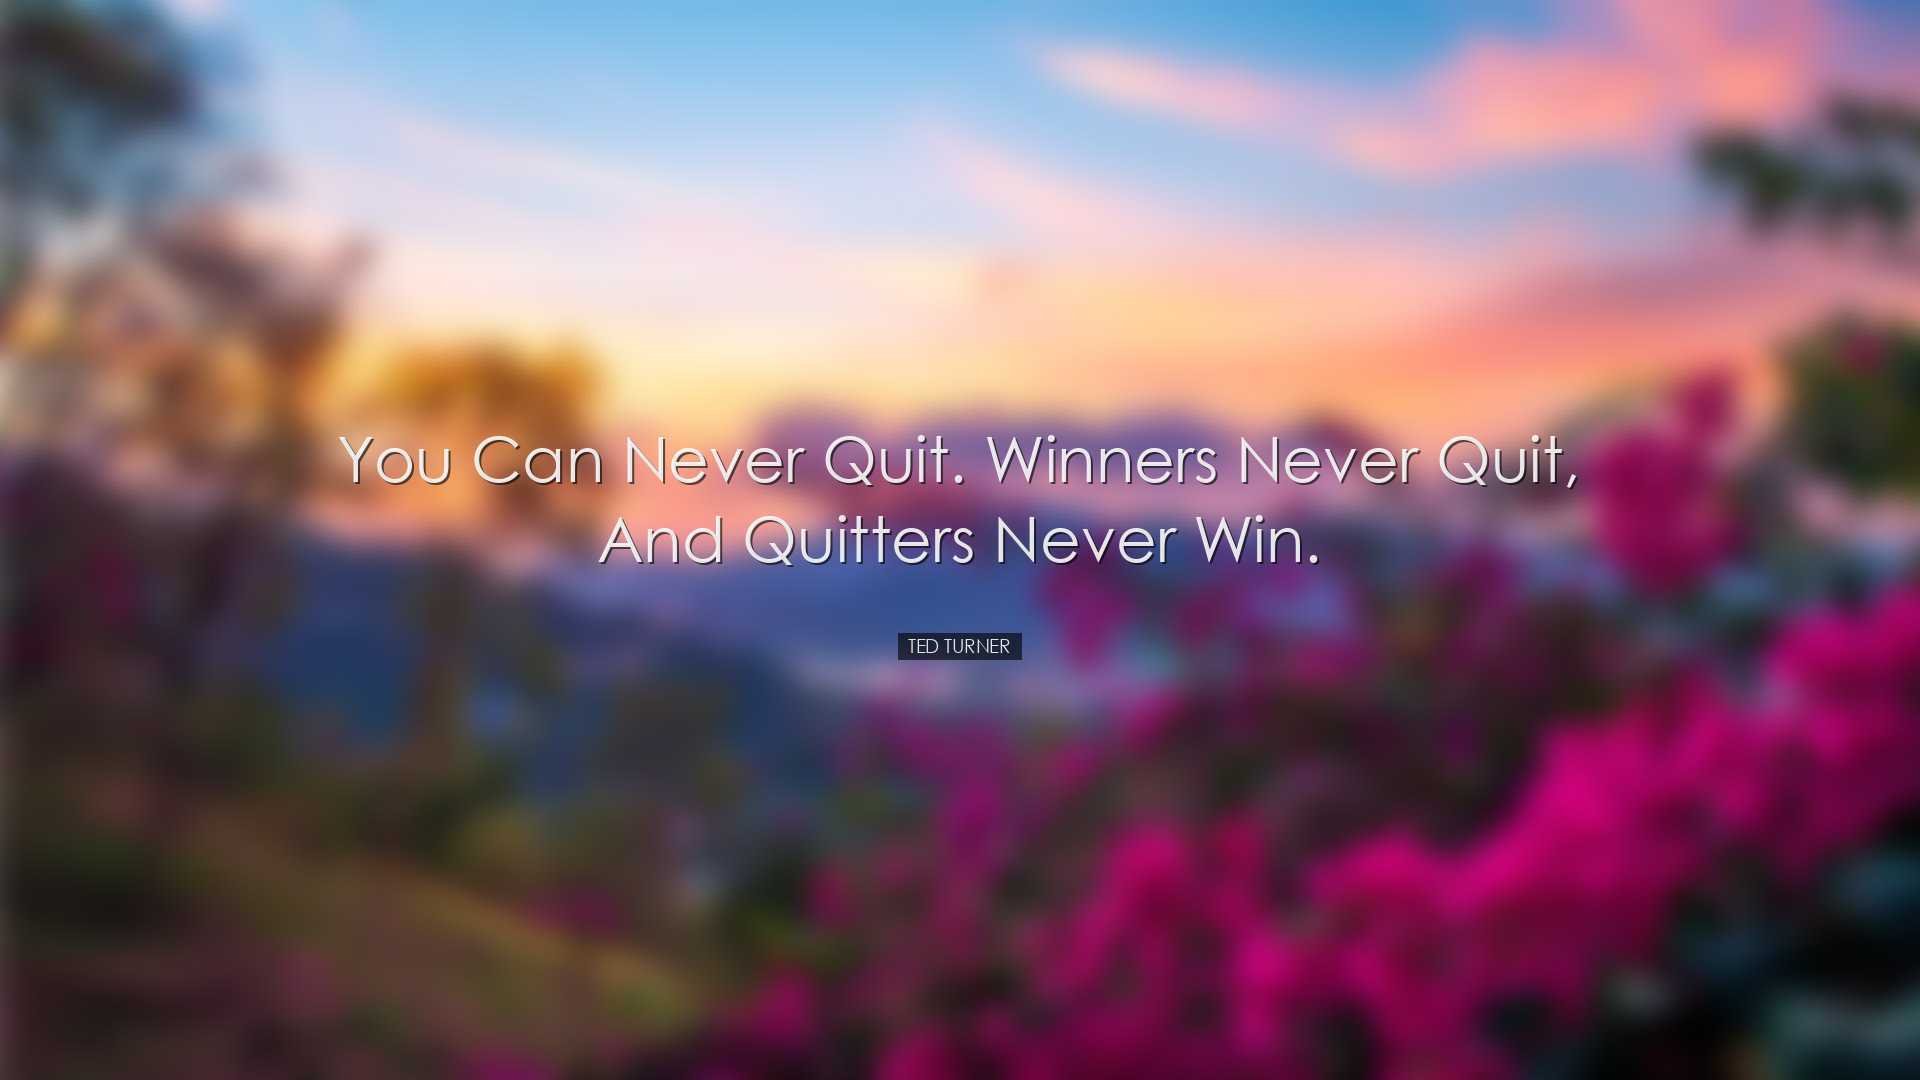 You can never quit. Winners never quit, and quitters never win. -